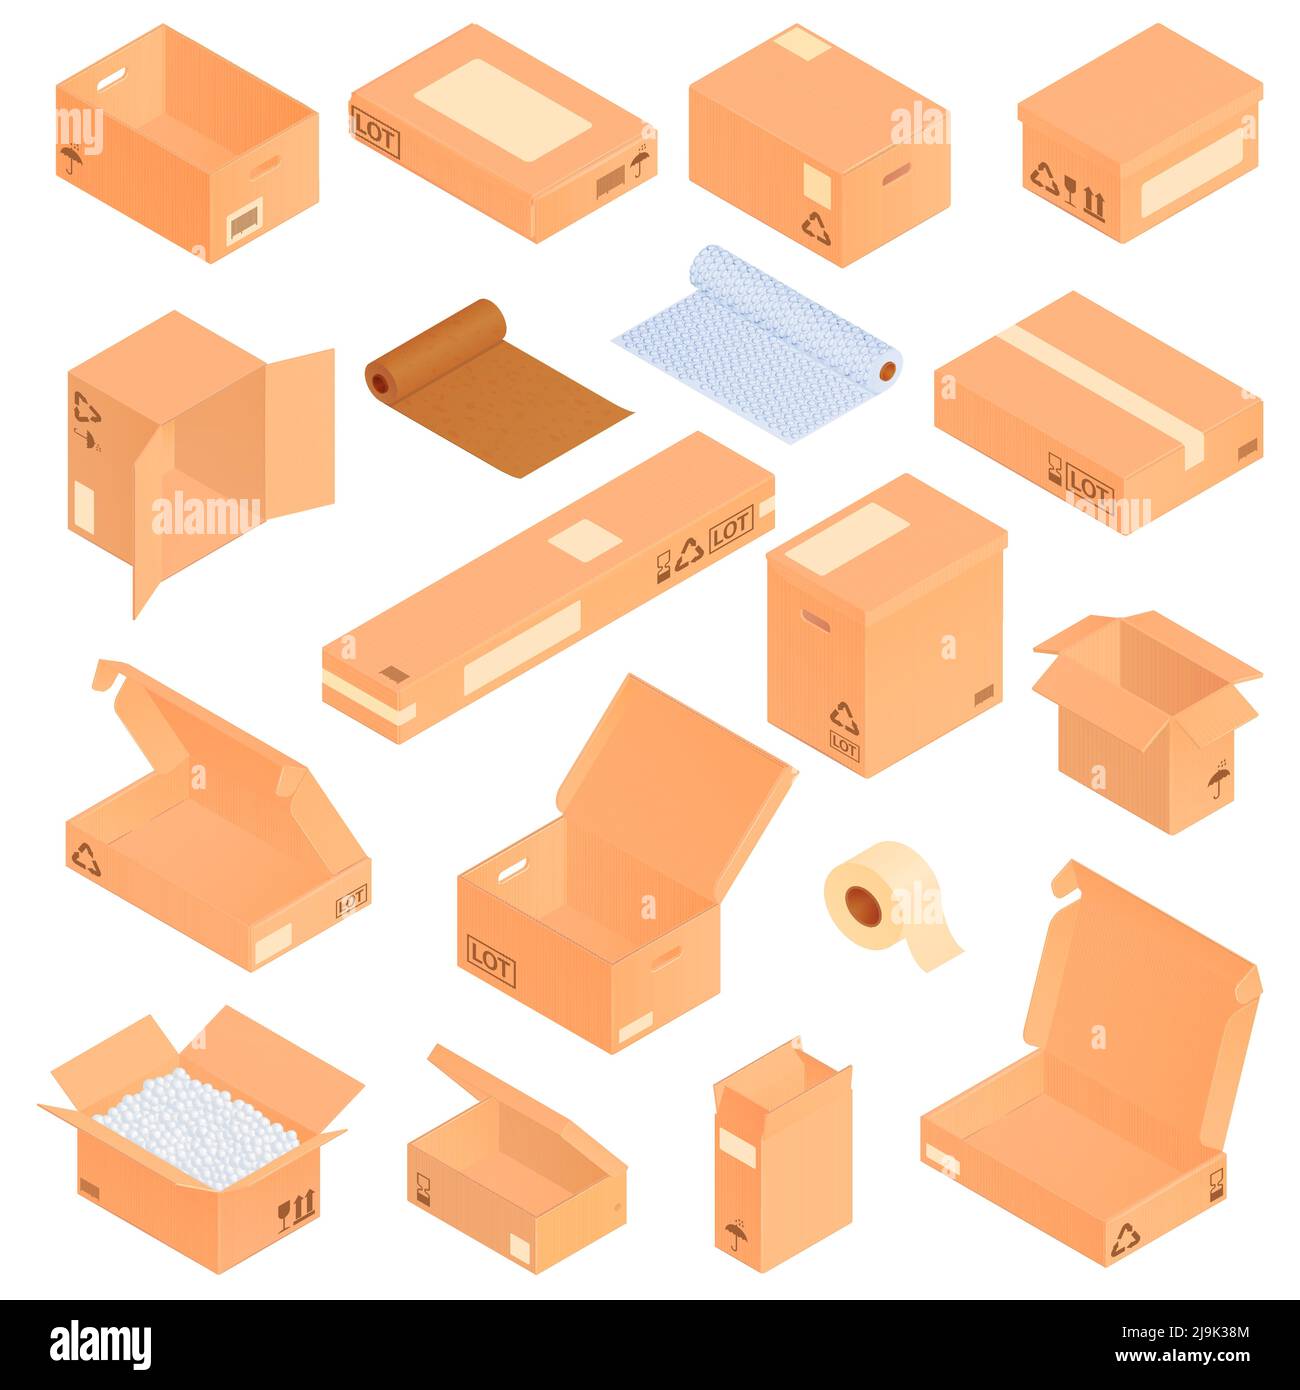 Isometric cardboard boxes set with isolated icons and images of pasteboard carton packs with packaging materials vector illustration Stock Vector